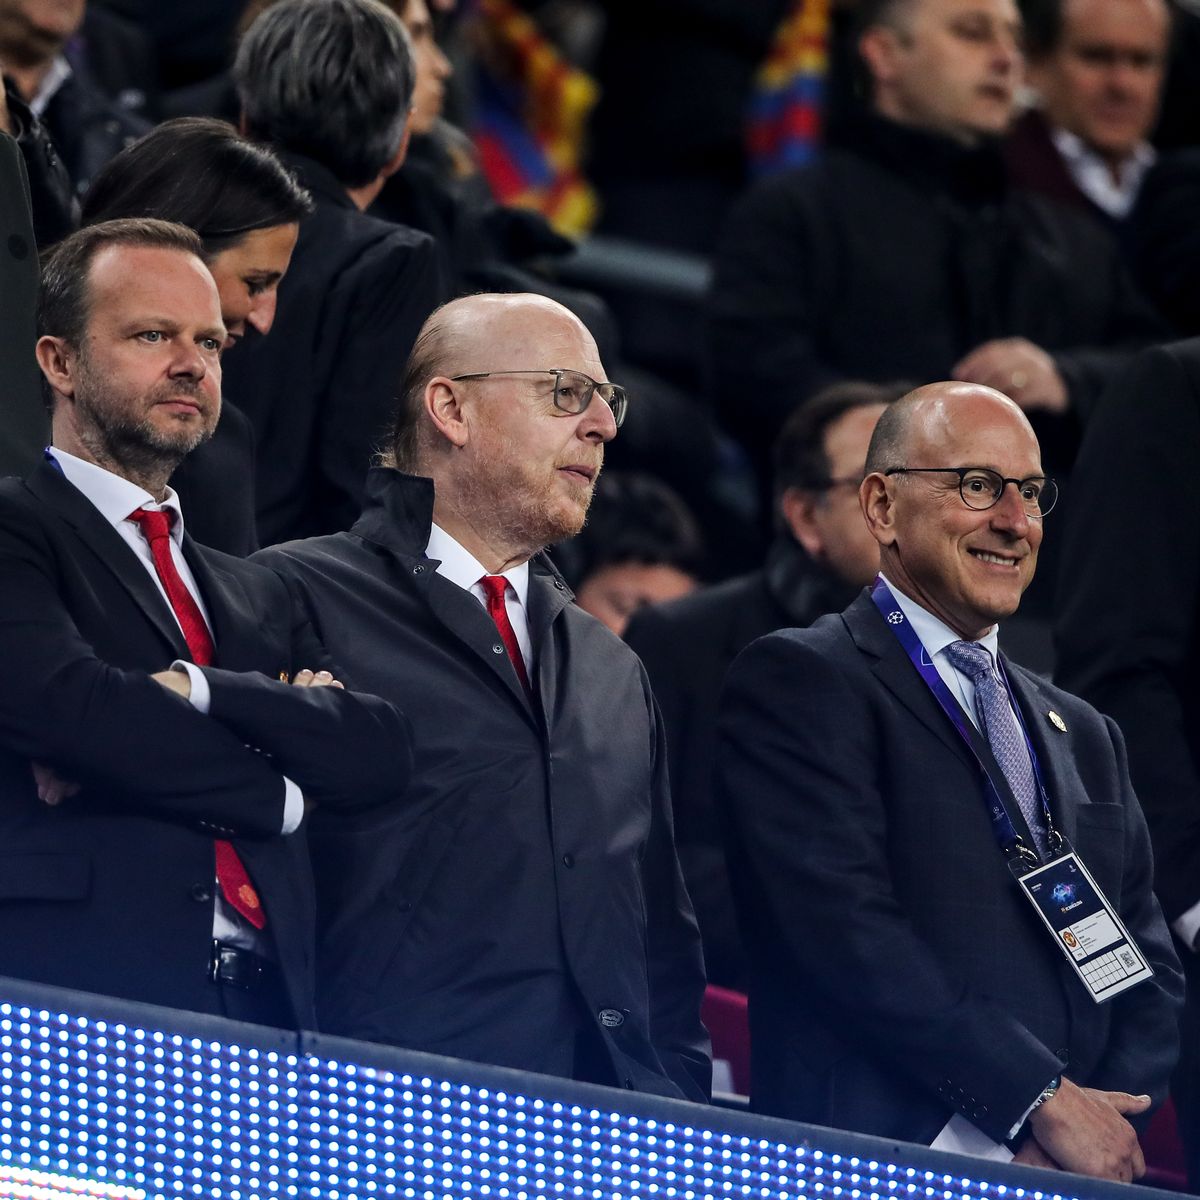 The Glazers, who control Manchester United, are divisive figures at Old Trafford.